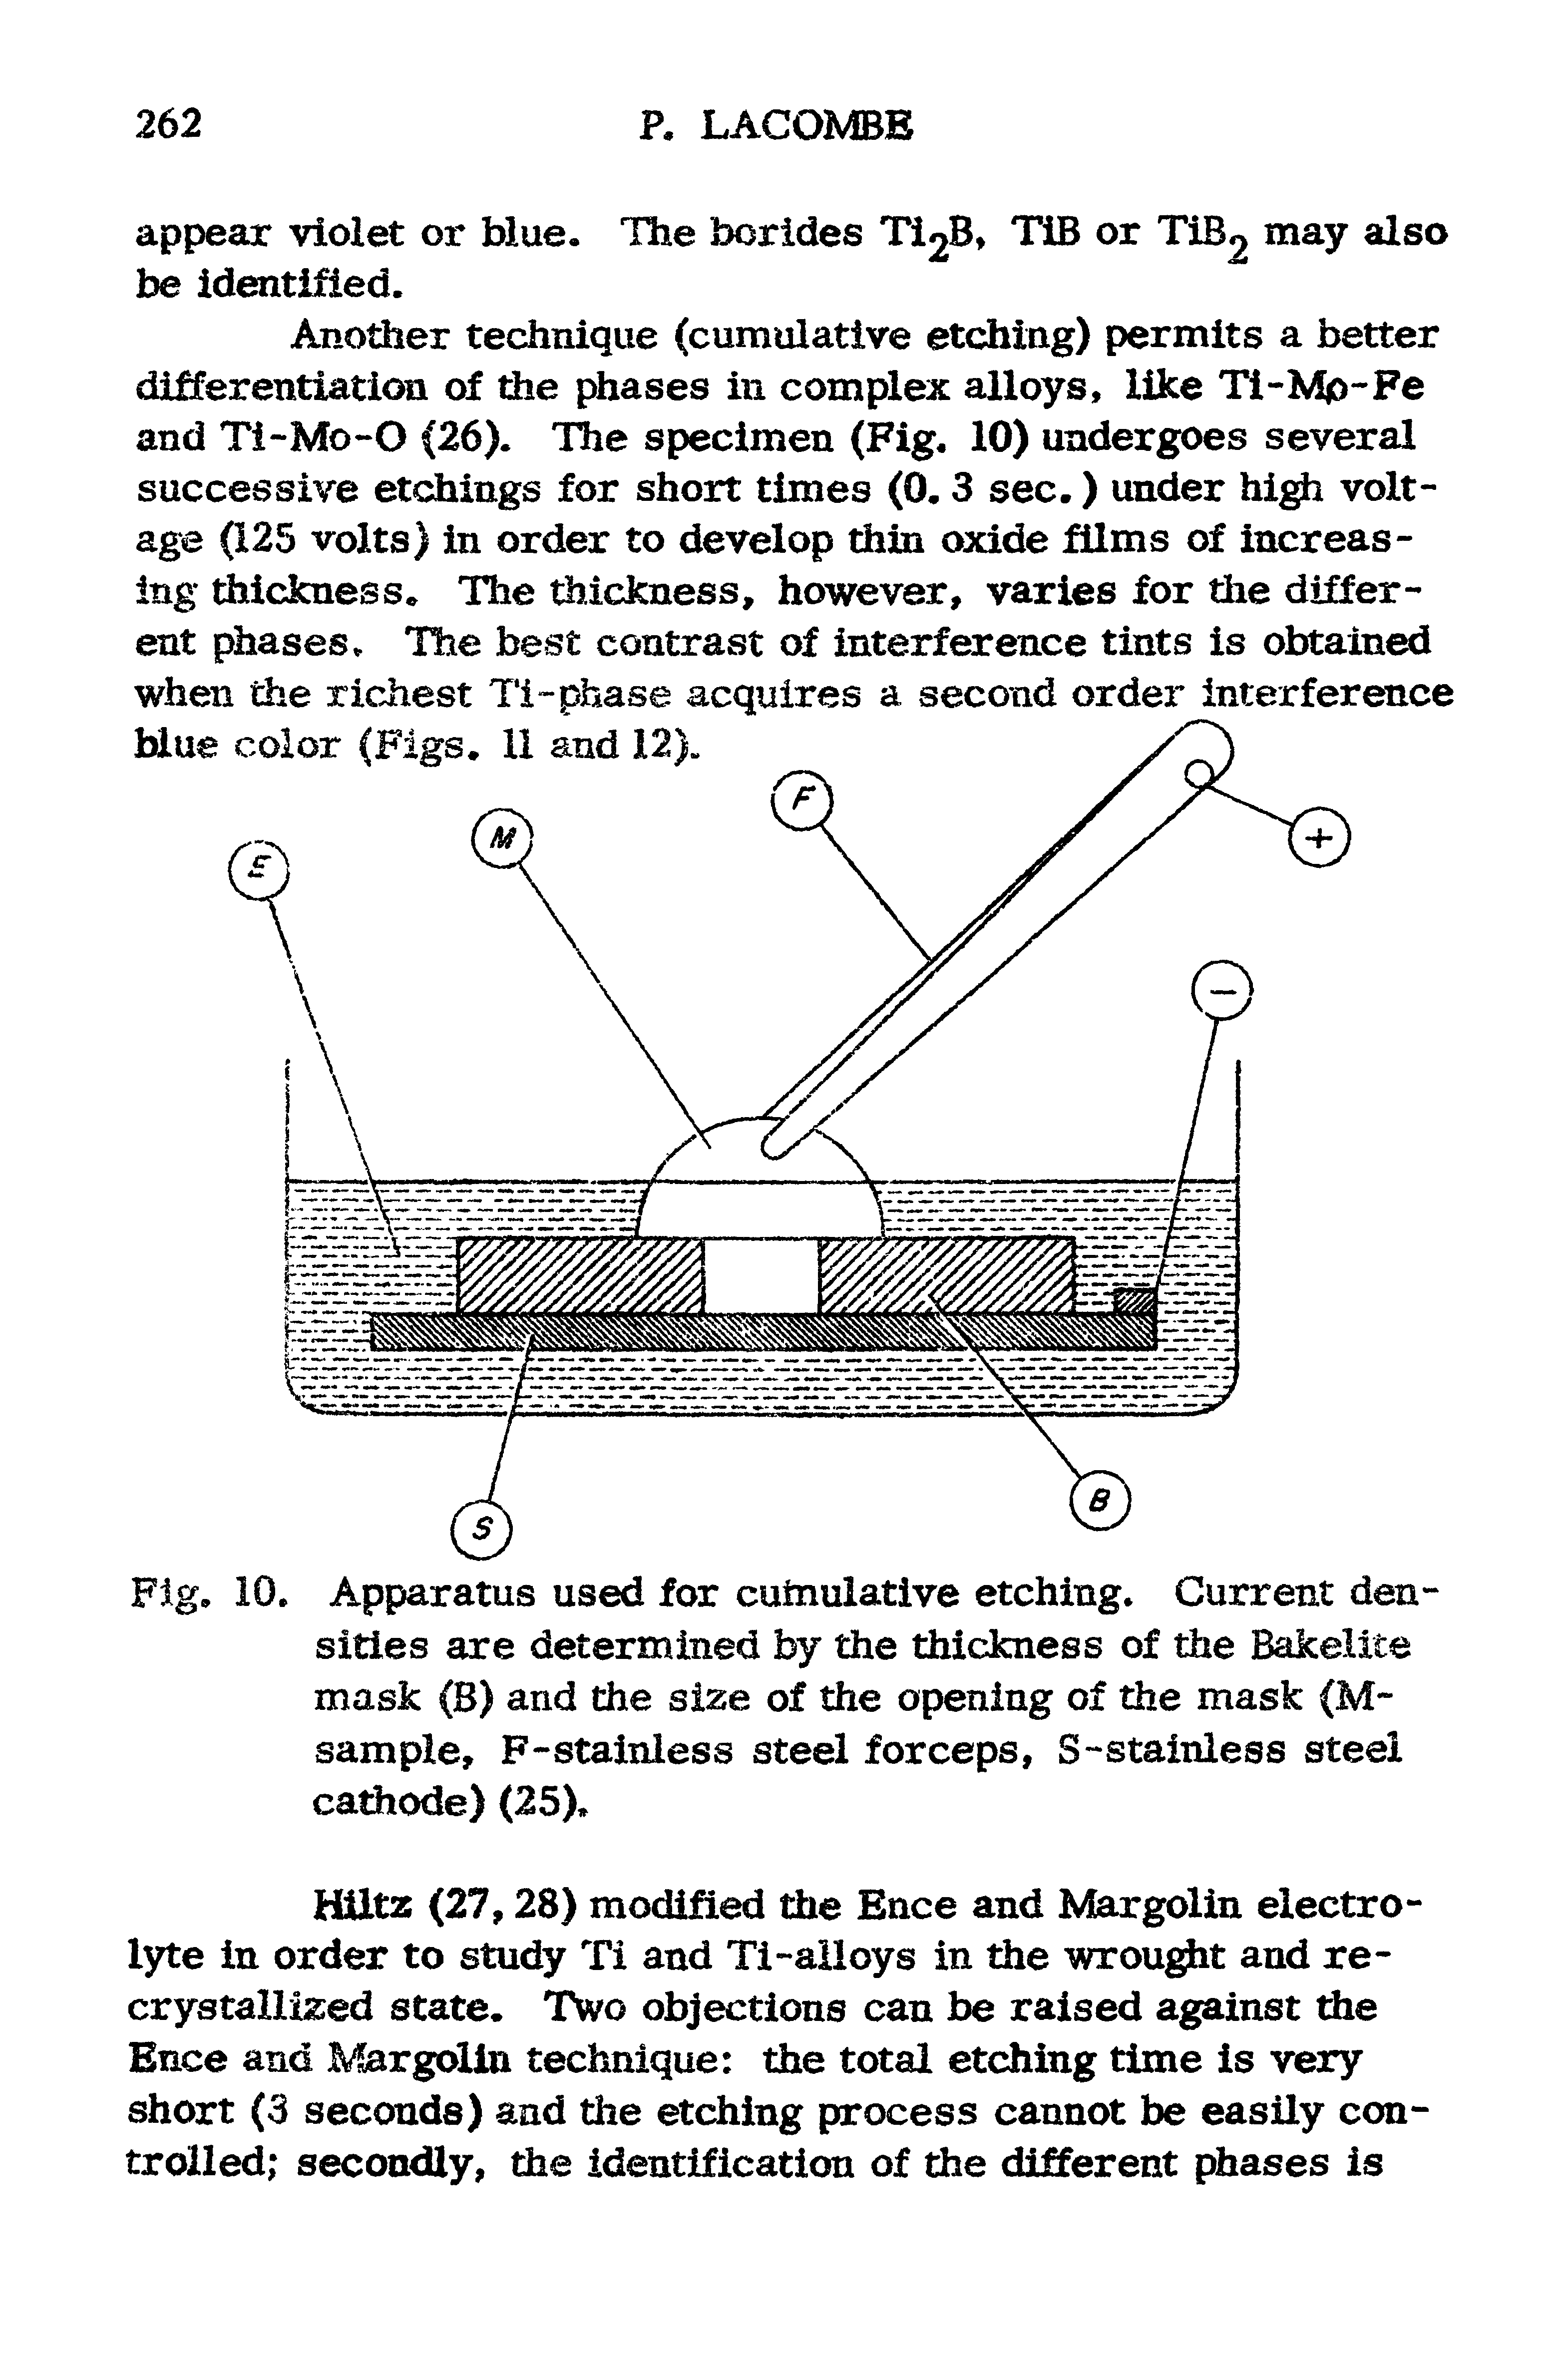 Fig. 10. Apparatus used for cuinulative etching. Current densities are determined by the thickness of the Bakelite mask (B) and the size of the opening of the mask (M-sample, F-stainless steel forceps, S-stainless steel cathode) (25),...